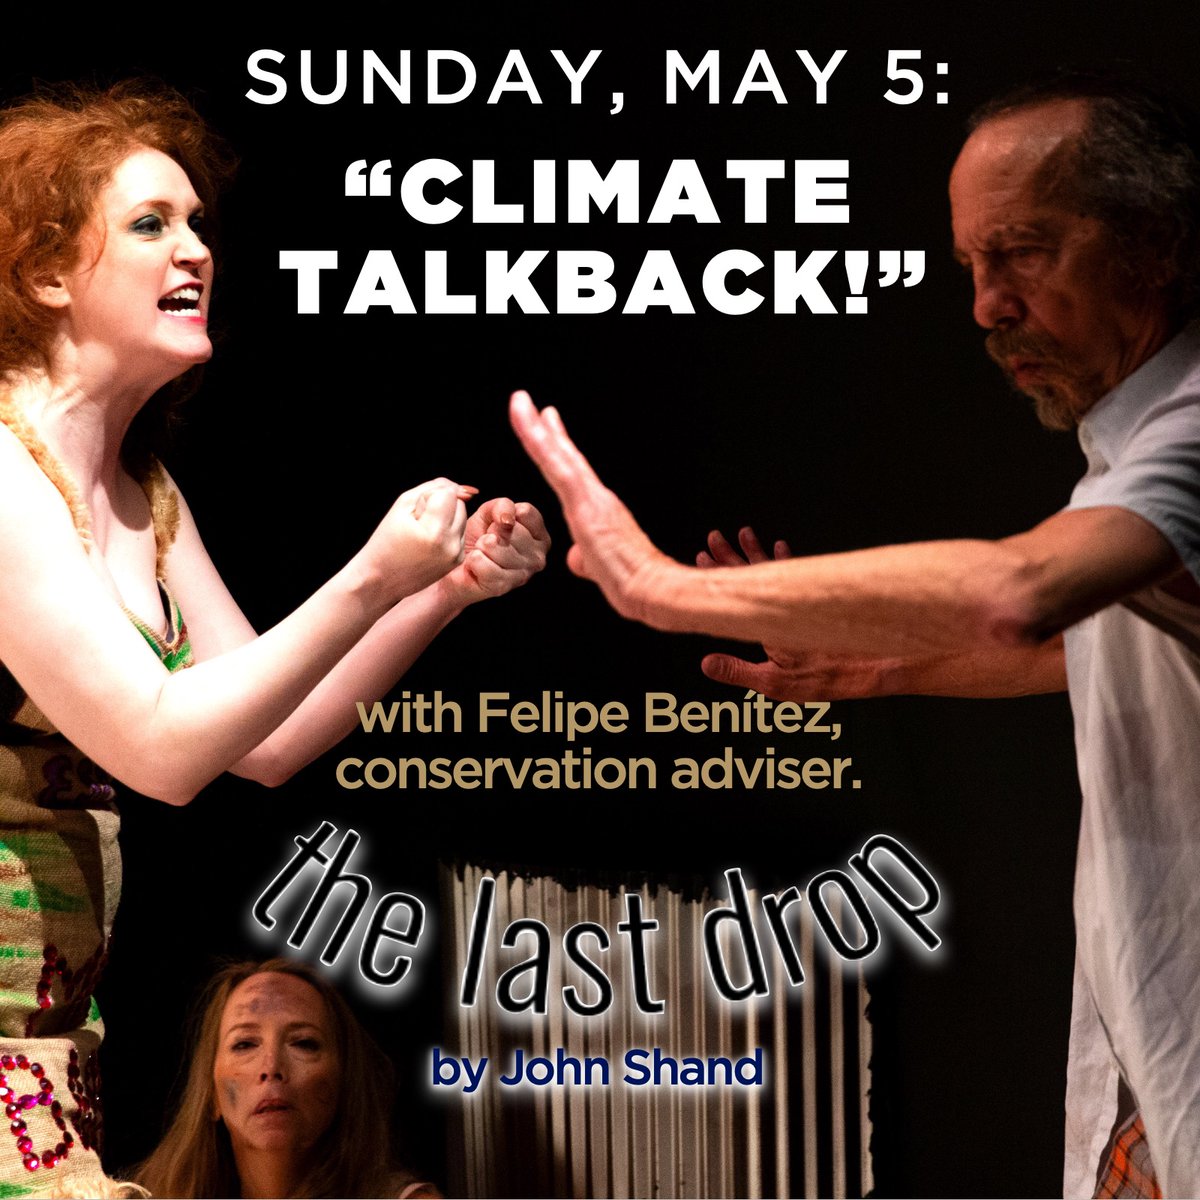 See a great comedic play in Adams Morgan at
@dcartscenter. 'The Last Drop' got rave reviews & runs Sat. 7:30, Sun. 2:30 w/ Talkback & Mon. $15 Industry Nite!  Get 2-for-1 TICKETS: ScenaTheatre.org #dcplays #ClimateCrisis #environment #dcentertainment #dmv #dcshow #climate